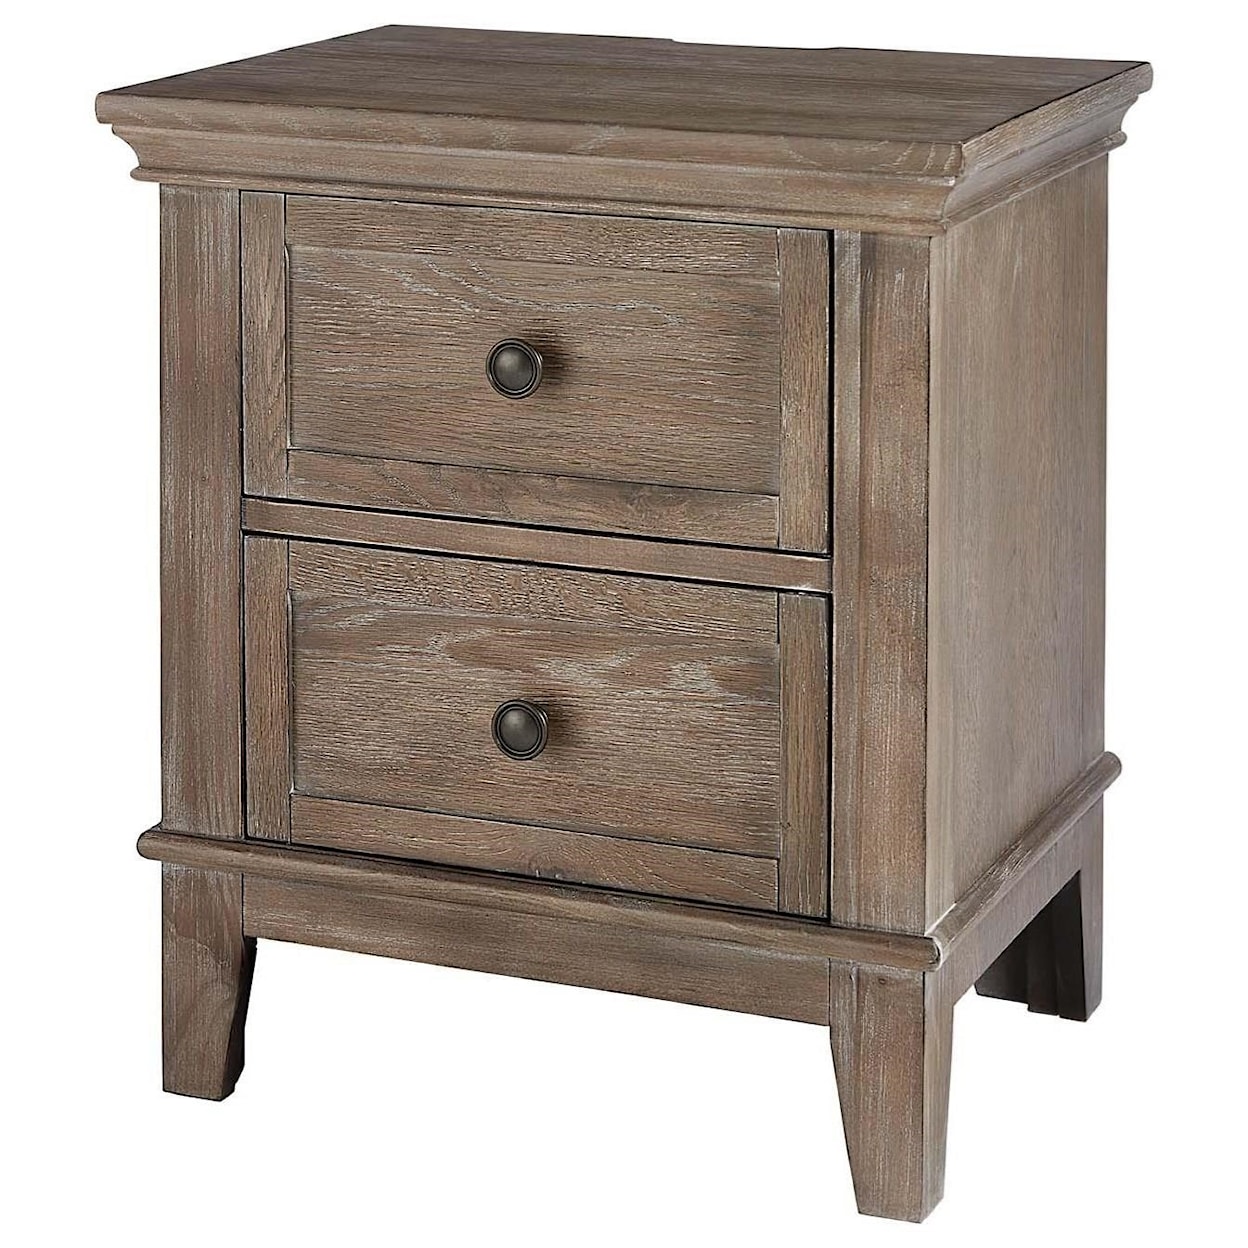 Westwood Design Leland Nightstand with Built-In Charging Station